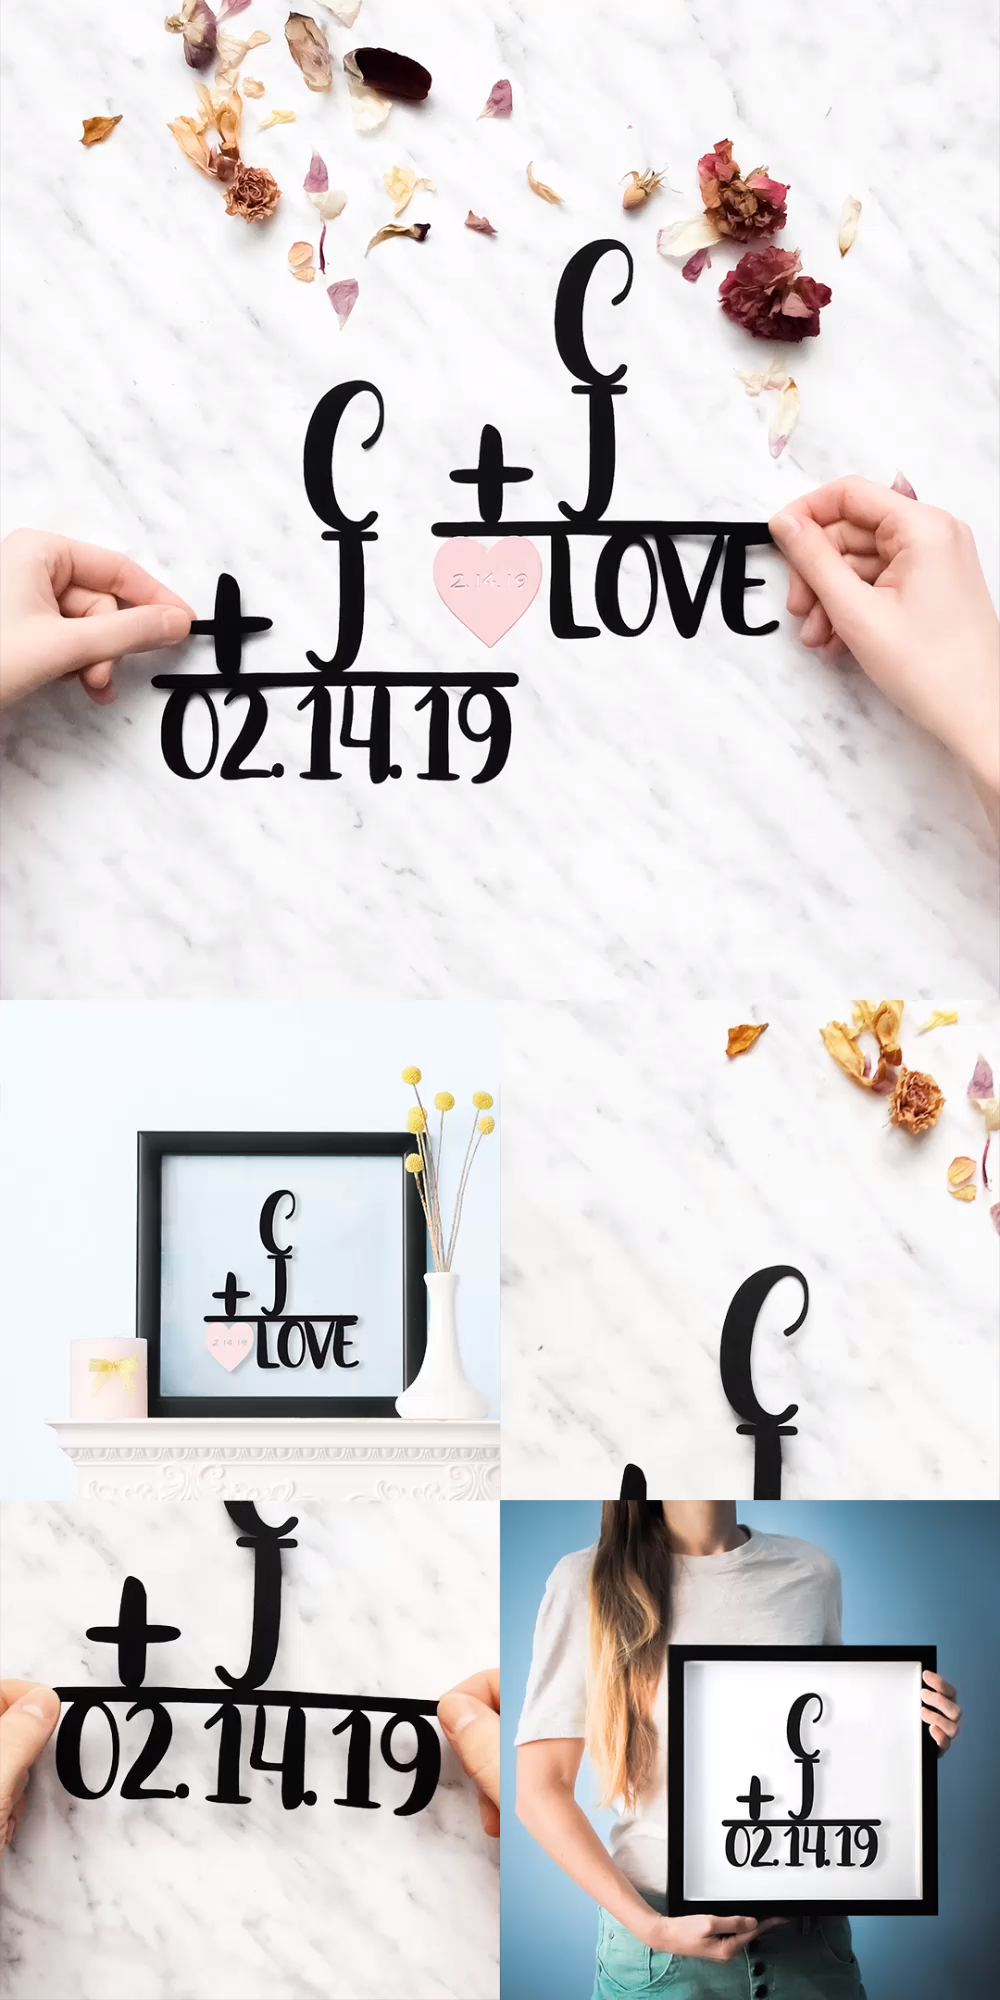 Wedding Gift Personalized / Initials Gift / Date Gift / Wedding Gift for Couple / Anniversary Gift -   17 diy projects For Couples friends ideas